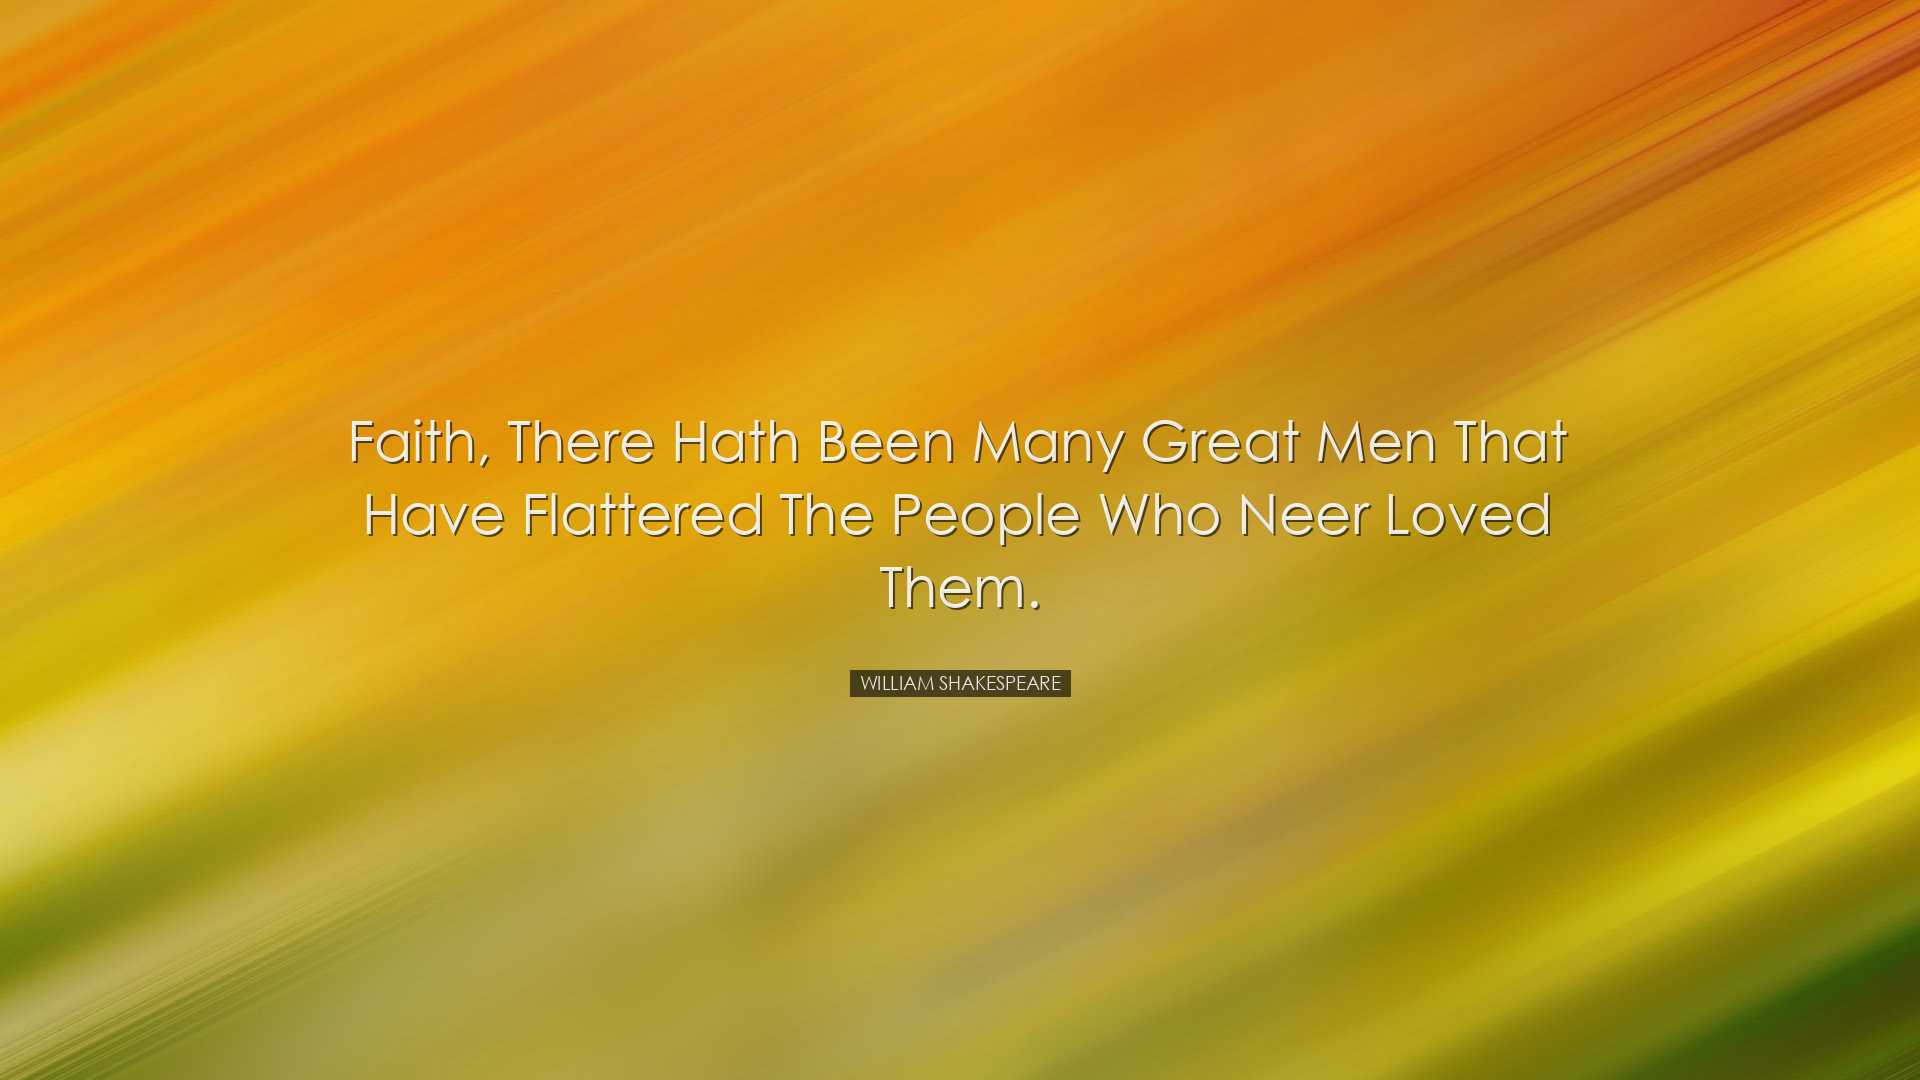 Faith, there hath been many great men that have flattered the peop